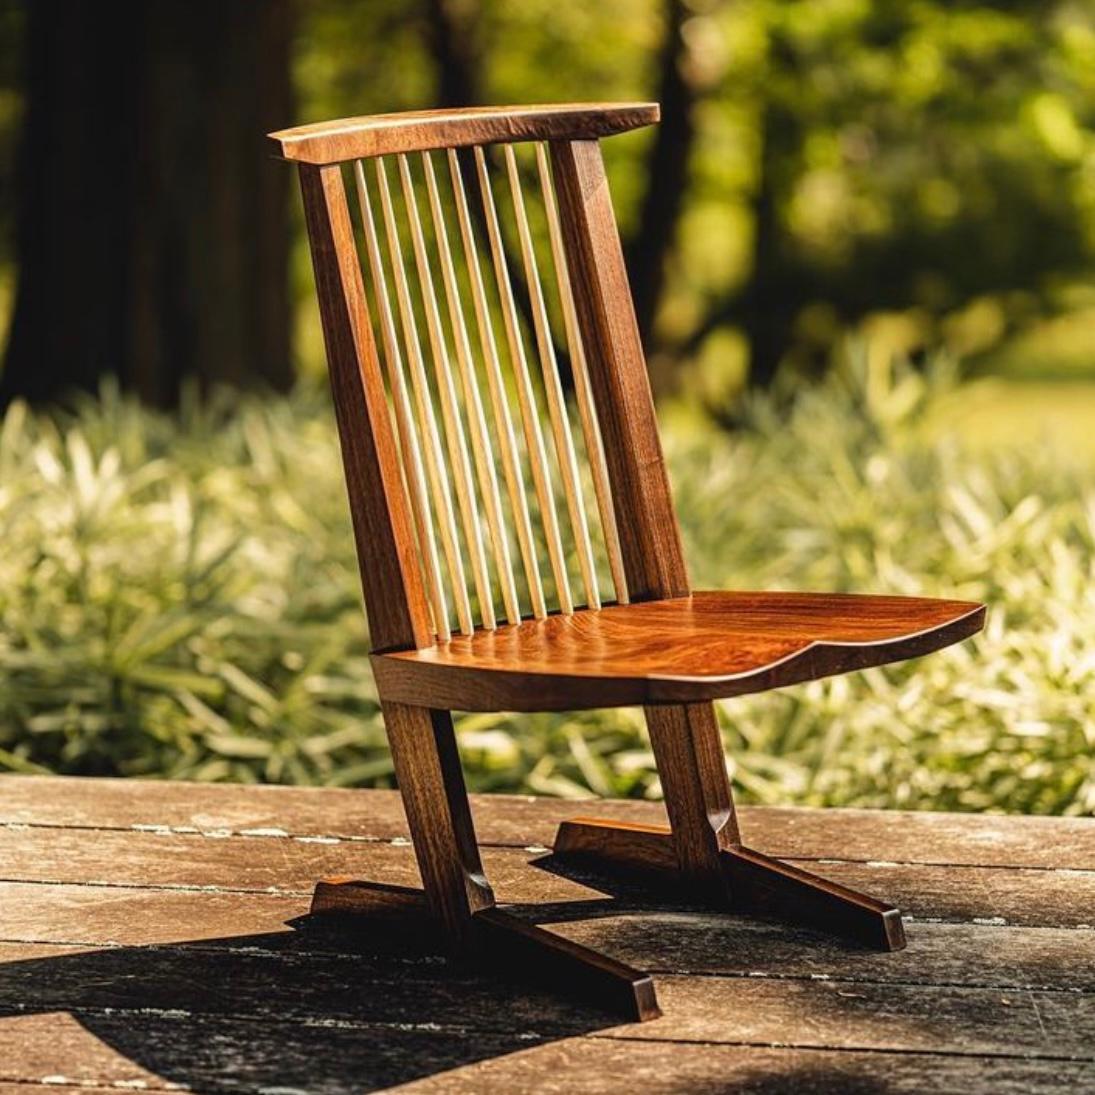 Designed by George Nakashima and executed by Mira Nakashima.

A truly gorgeous piece of craftsmanship, this Conoid lounge chair is perhaps one of the most beautiful pieces we've ever handled. 

The expressive claro walnut seat along with the sublime